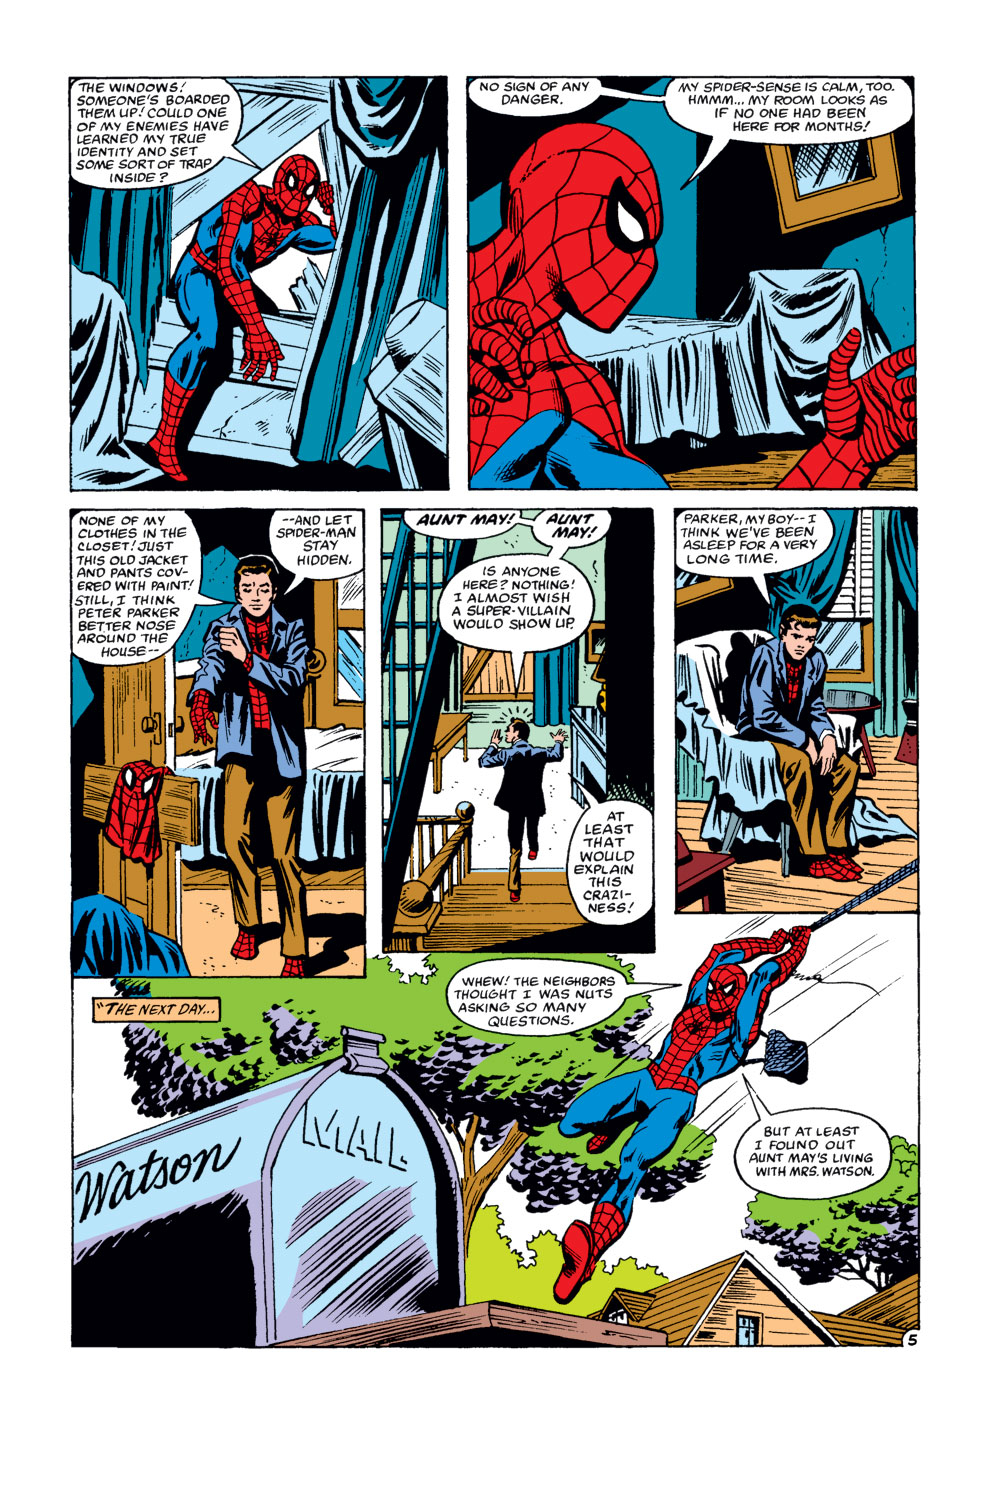 What If? (1977) issue 30 - Spider-Man's clone lived - Page 6